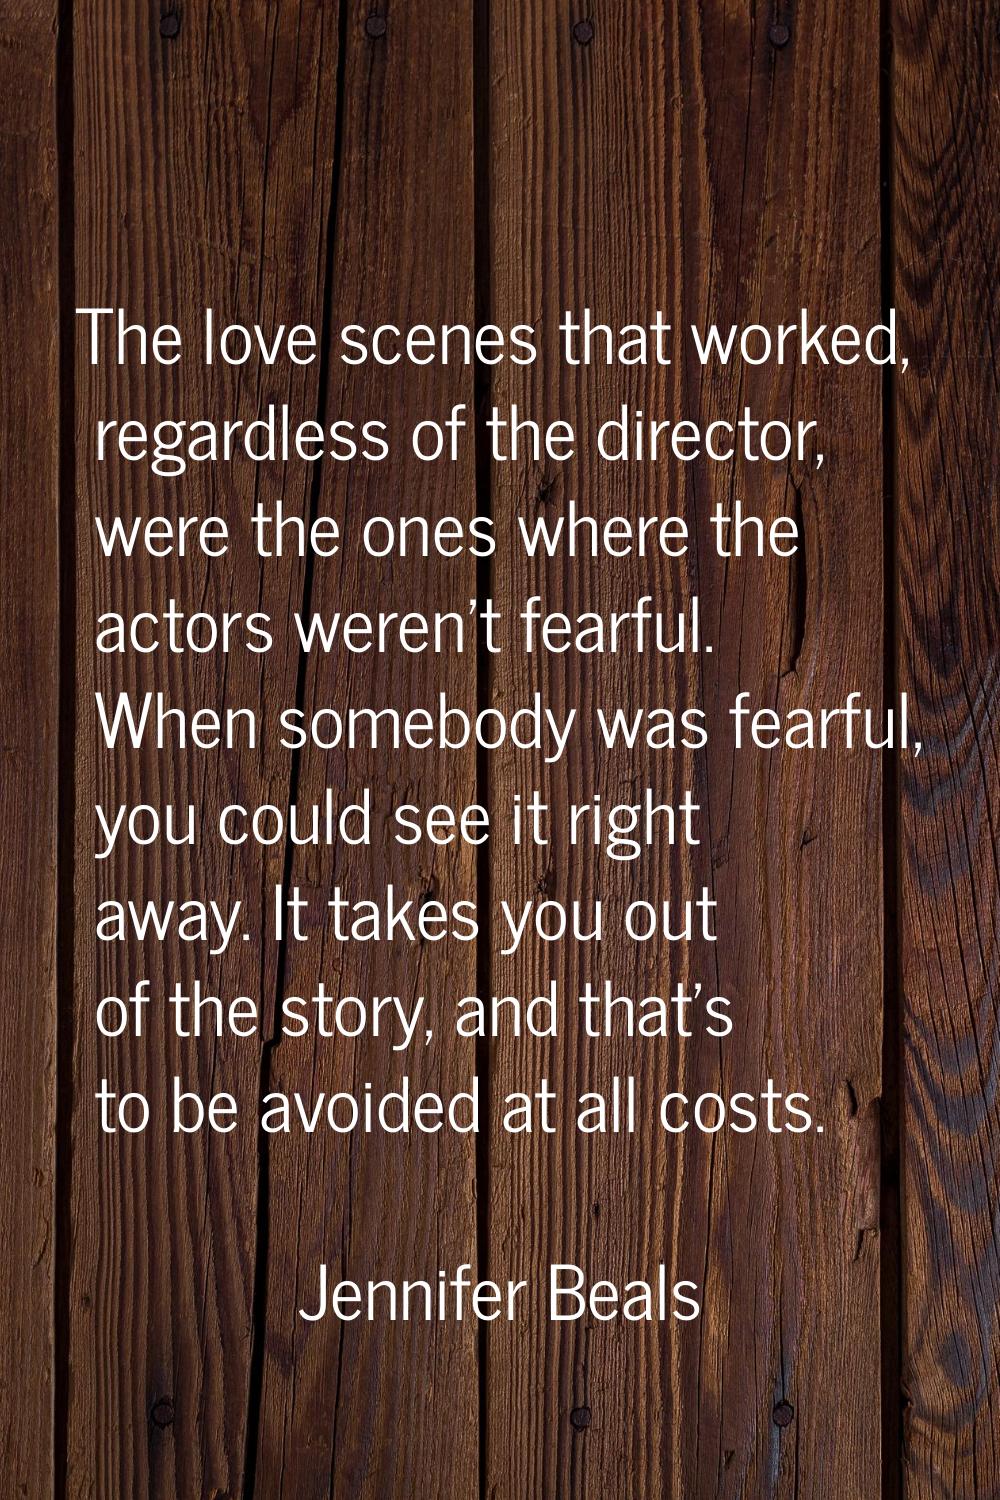 The love scenes that worked, regardless of the director, were the ones where the actors weren't fea